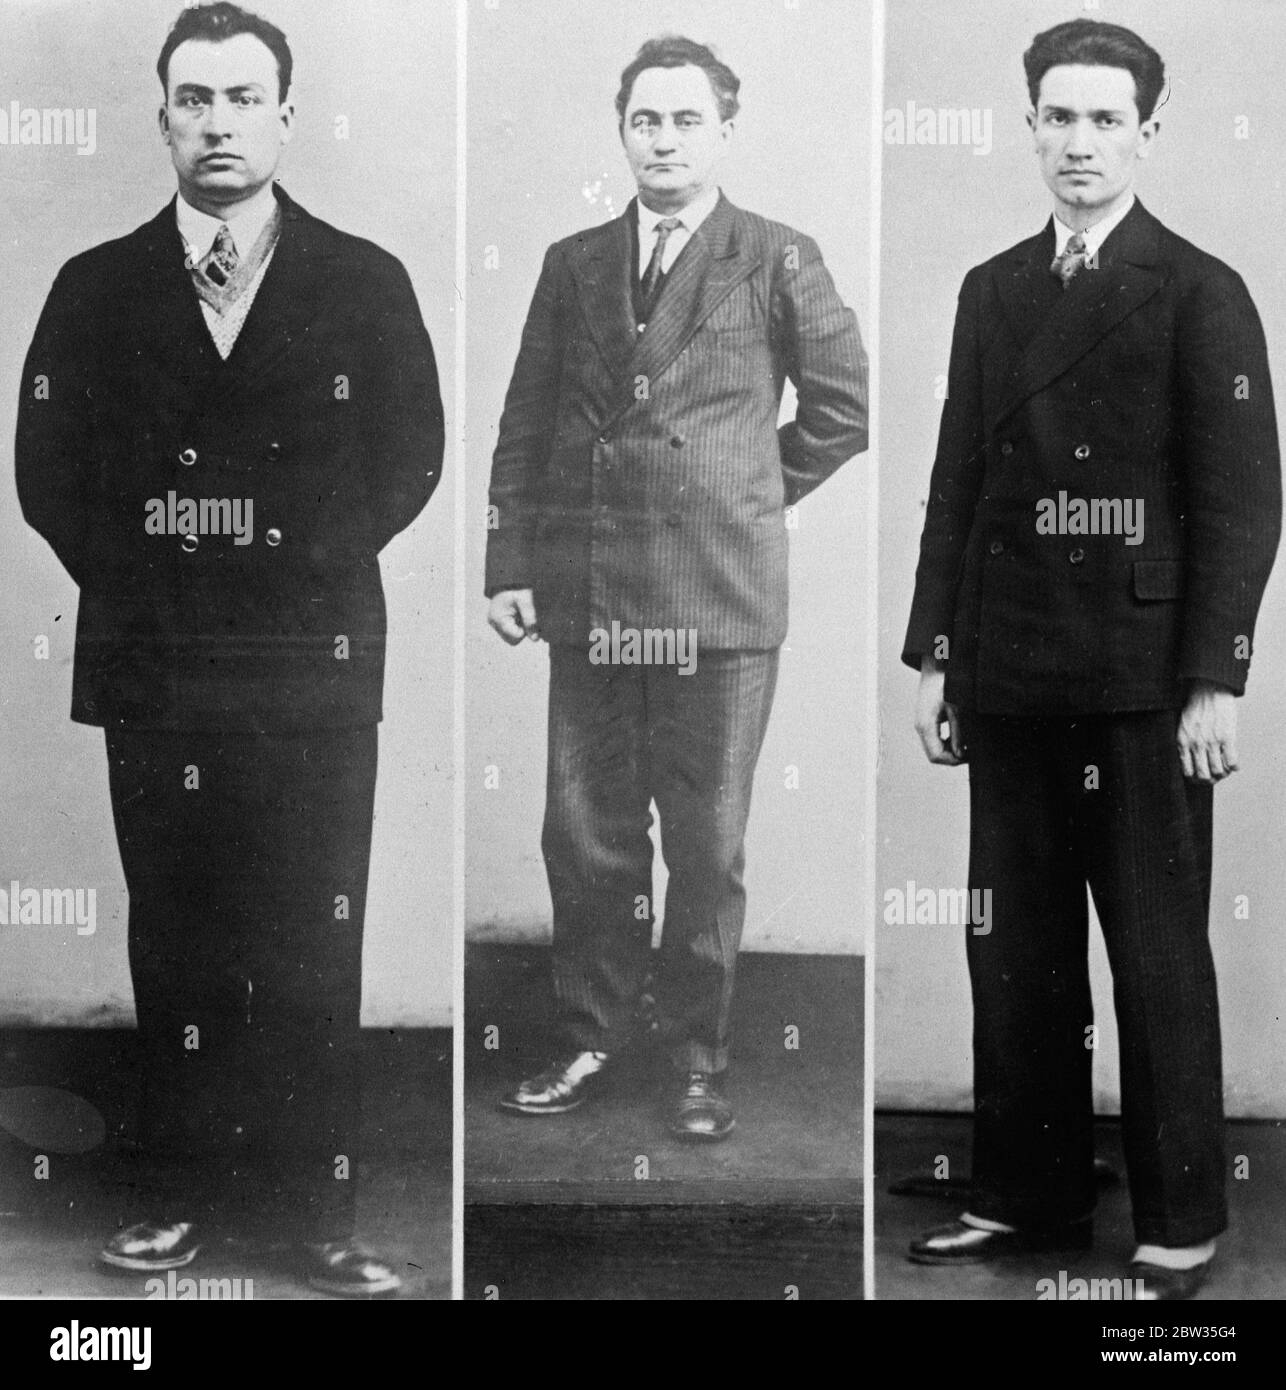 Three men arrested for Reichstag fire . The German police have arrested three Bulgarian Communists , Wassil Konstaninoff Taneff , Georgi Dimitroff , and Blagoi , Siminoff Popoff , whom they suspect of being concerned in causing the fire which destroyed the Reichstag building in Berlin . The three Communists who have been arrested . Left to right Wassil Konstaninoff Taneff , Georgi Dimitroff and Blagoi Siminoff Popoff . 4 April 1933 Stock Photo